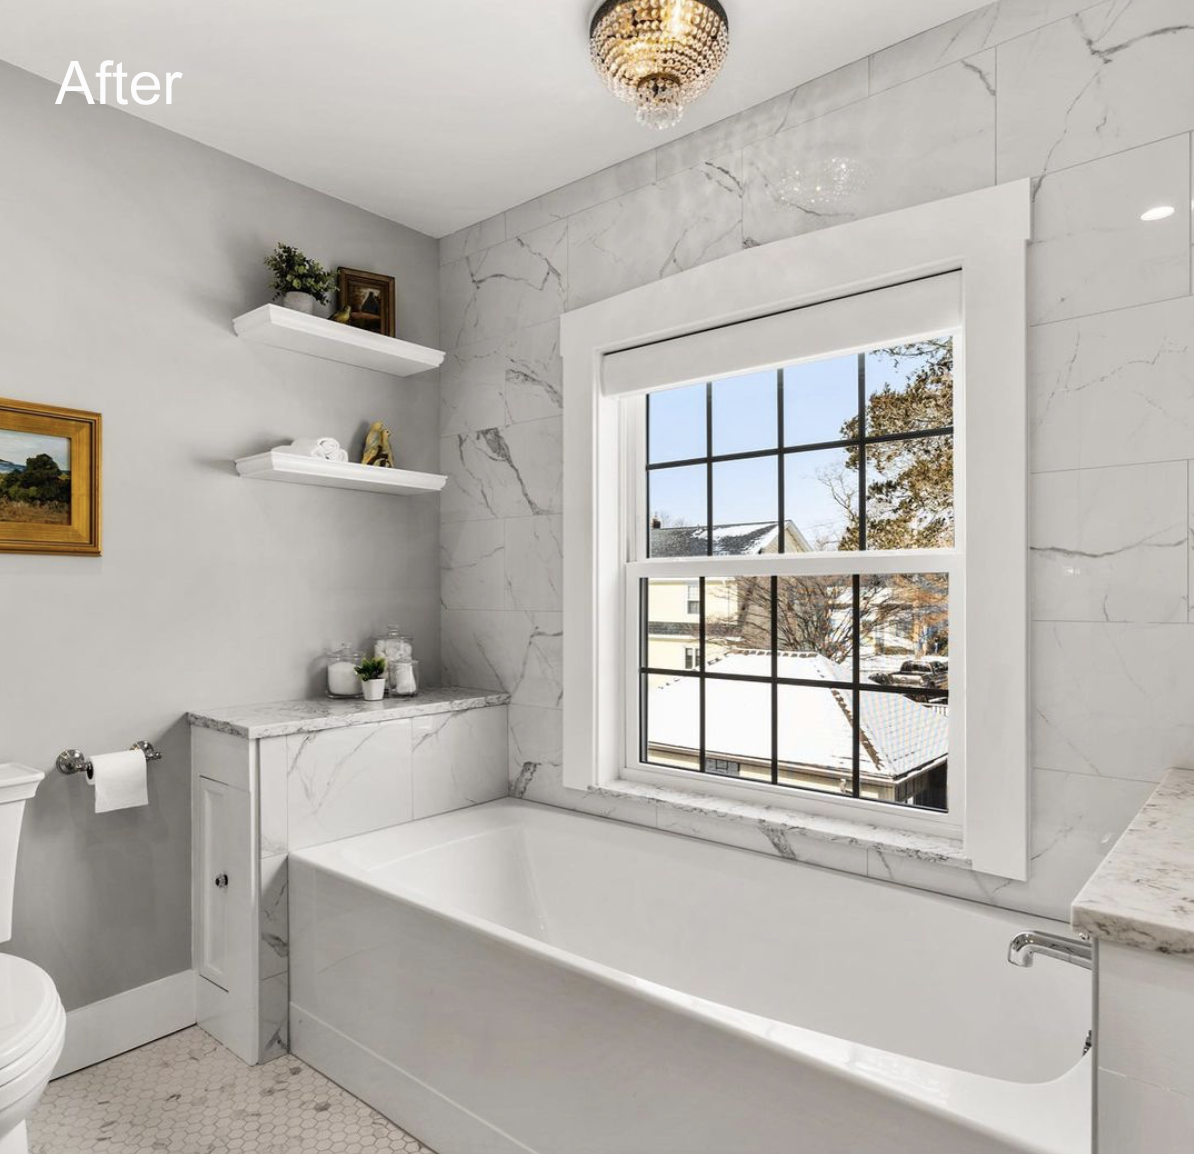 Before & After: A Dramatic Bathroom Makeover /// By Design Fixation #pink #bathroom #makeover